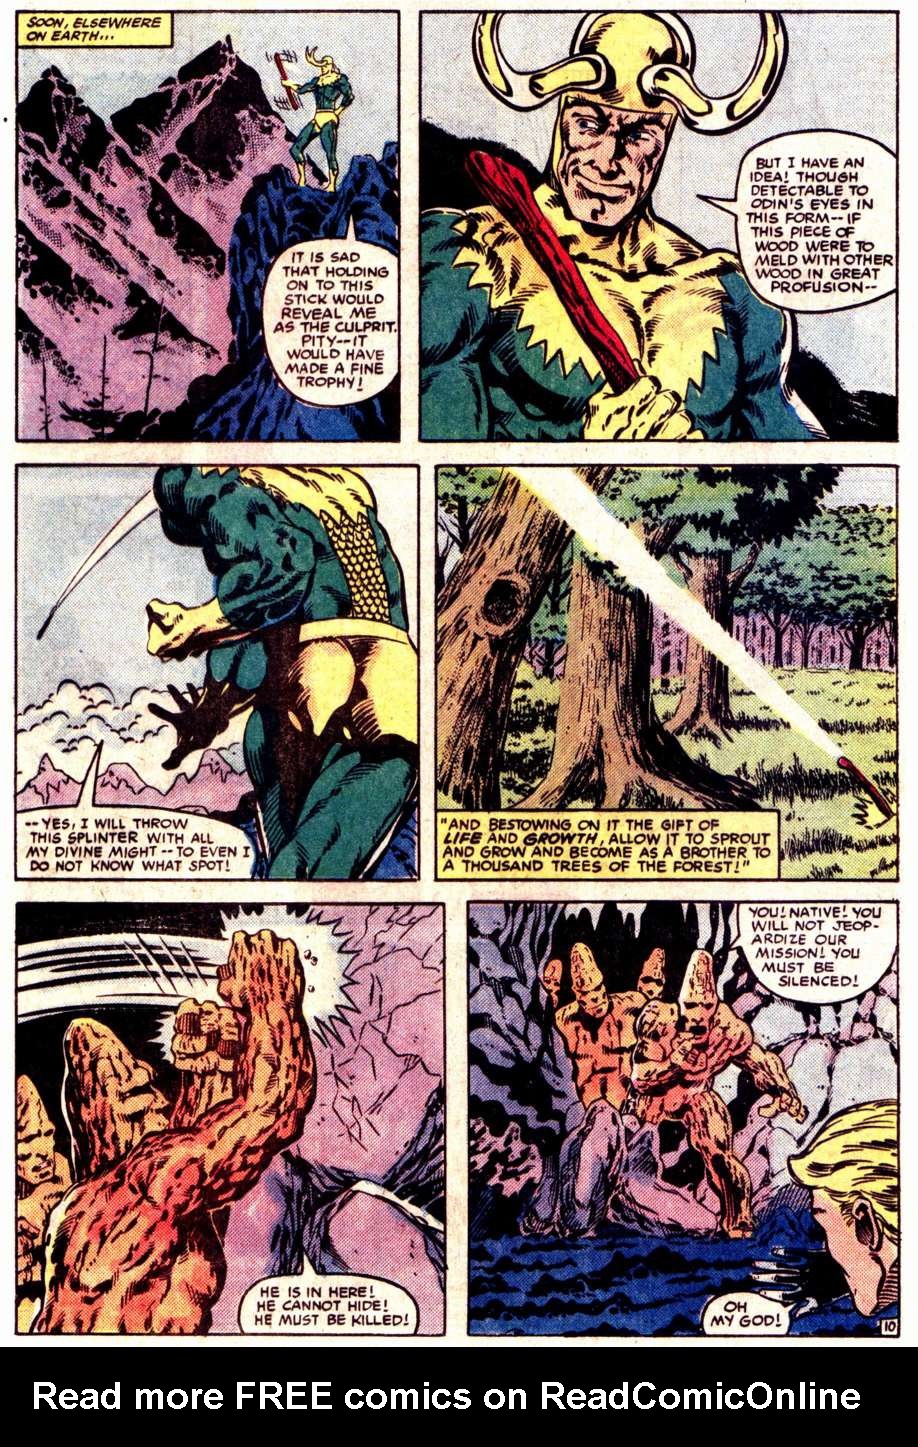 What If? (1977) #47_-_Loki_had_found_The_hammer_of_Thor #47 - English 11